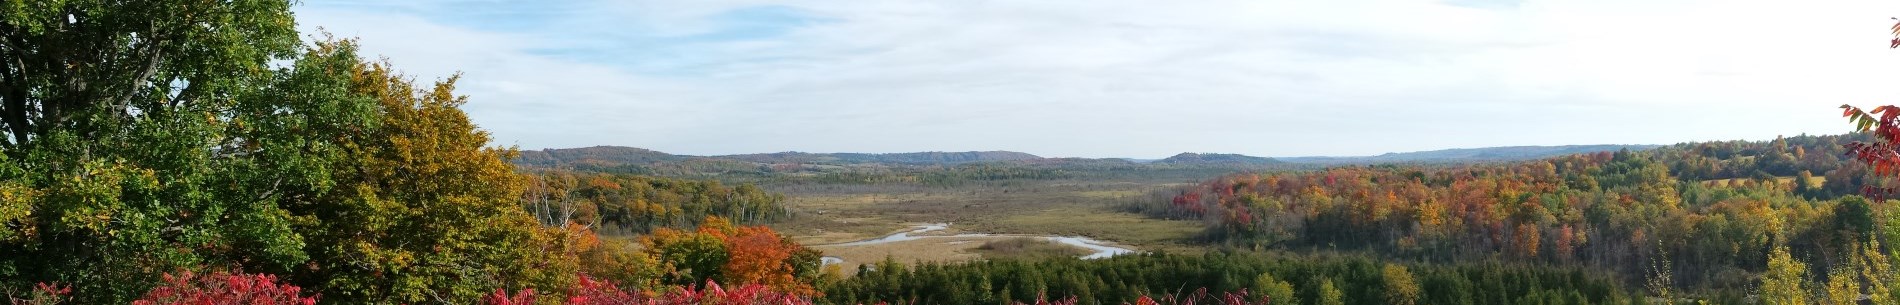 View of Windy River Conservation Area from the viewing platform